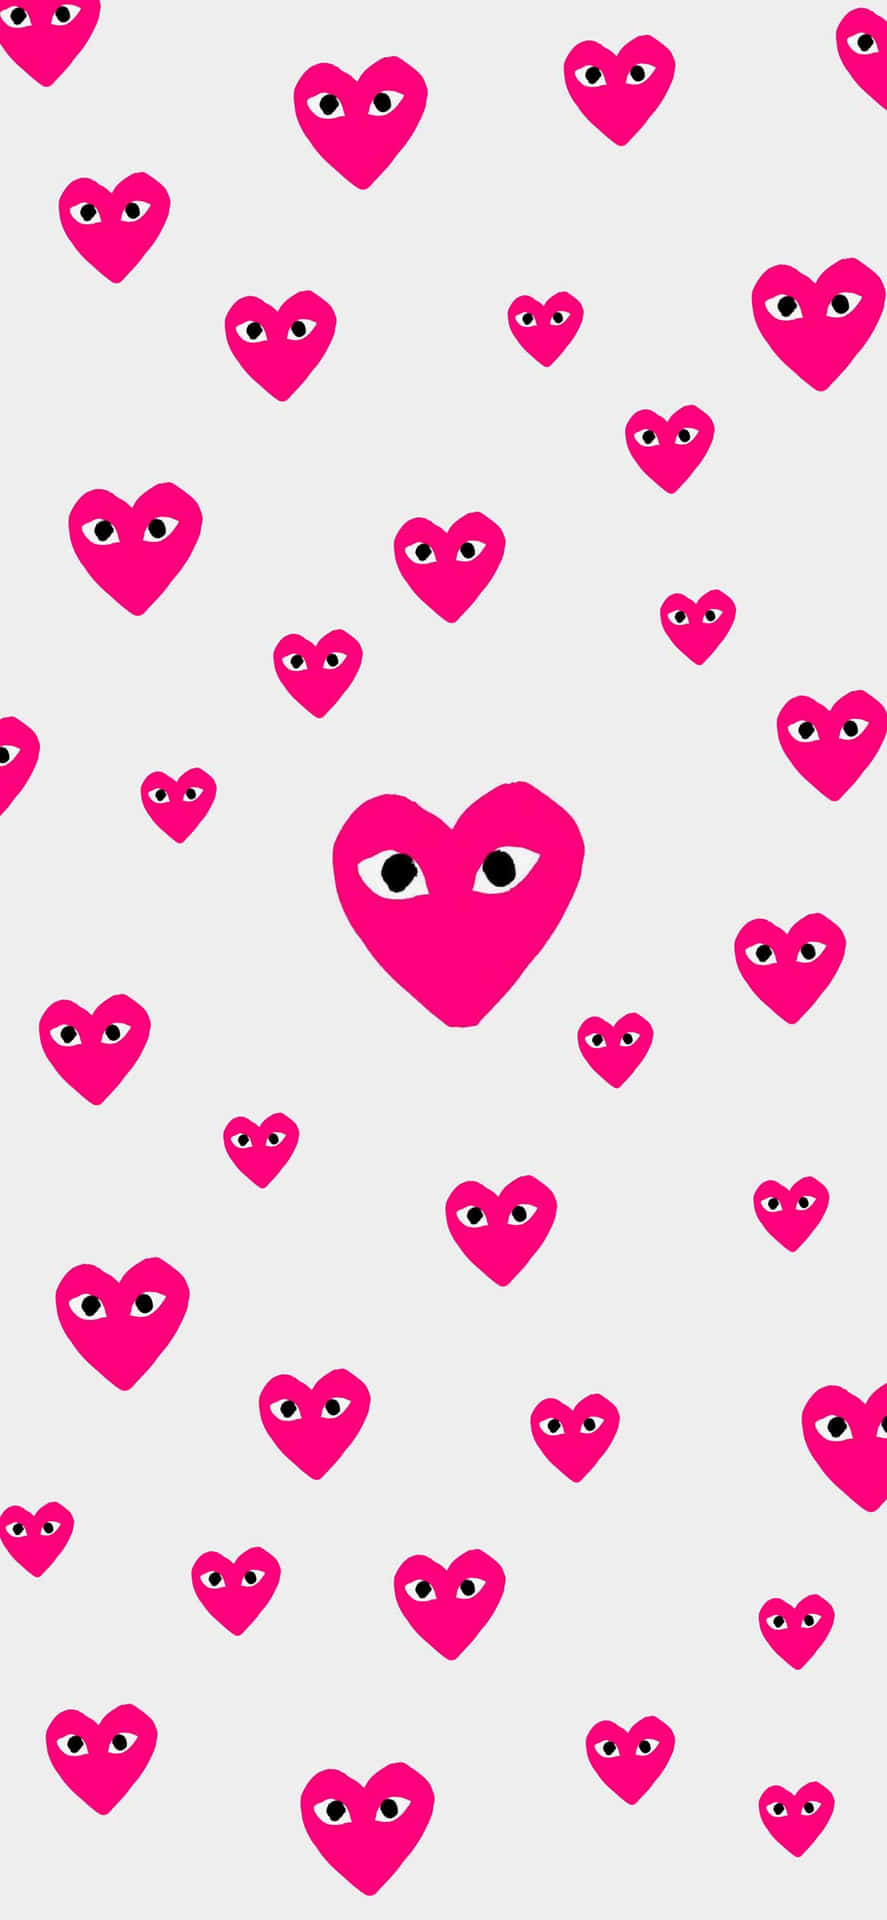 Free Cdg Play Wallpaper Downloads, [100+] Cdg Play Wallpapers for FREE |  